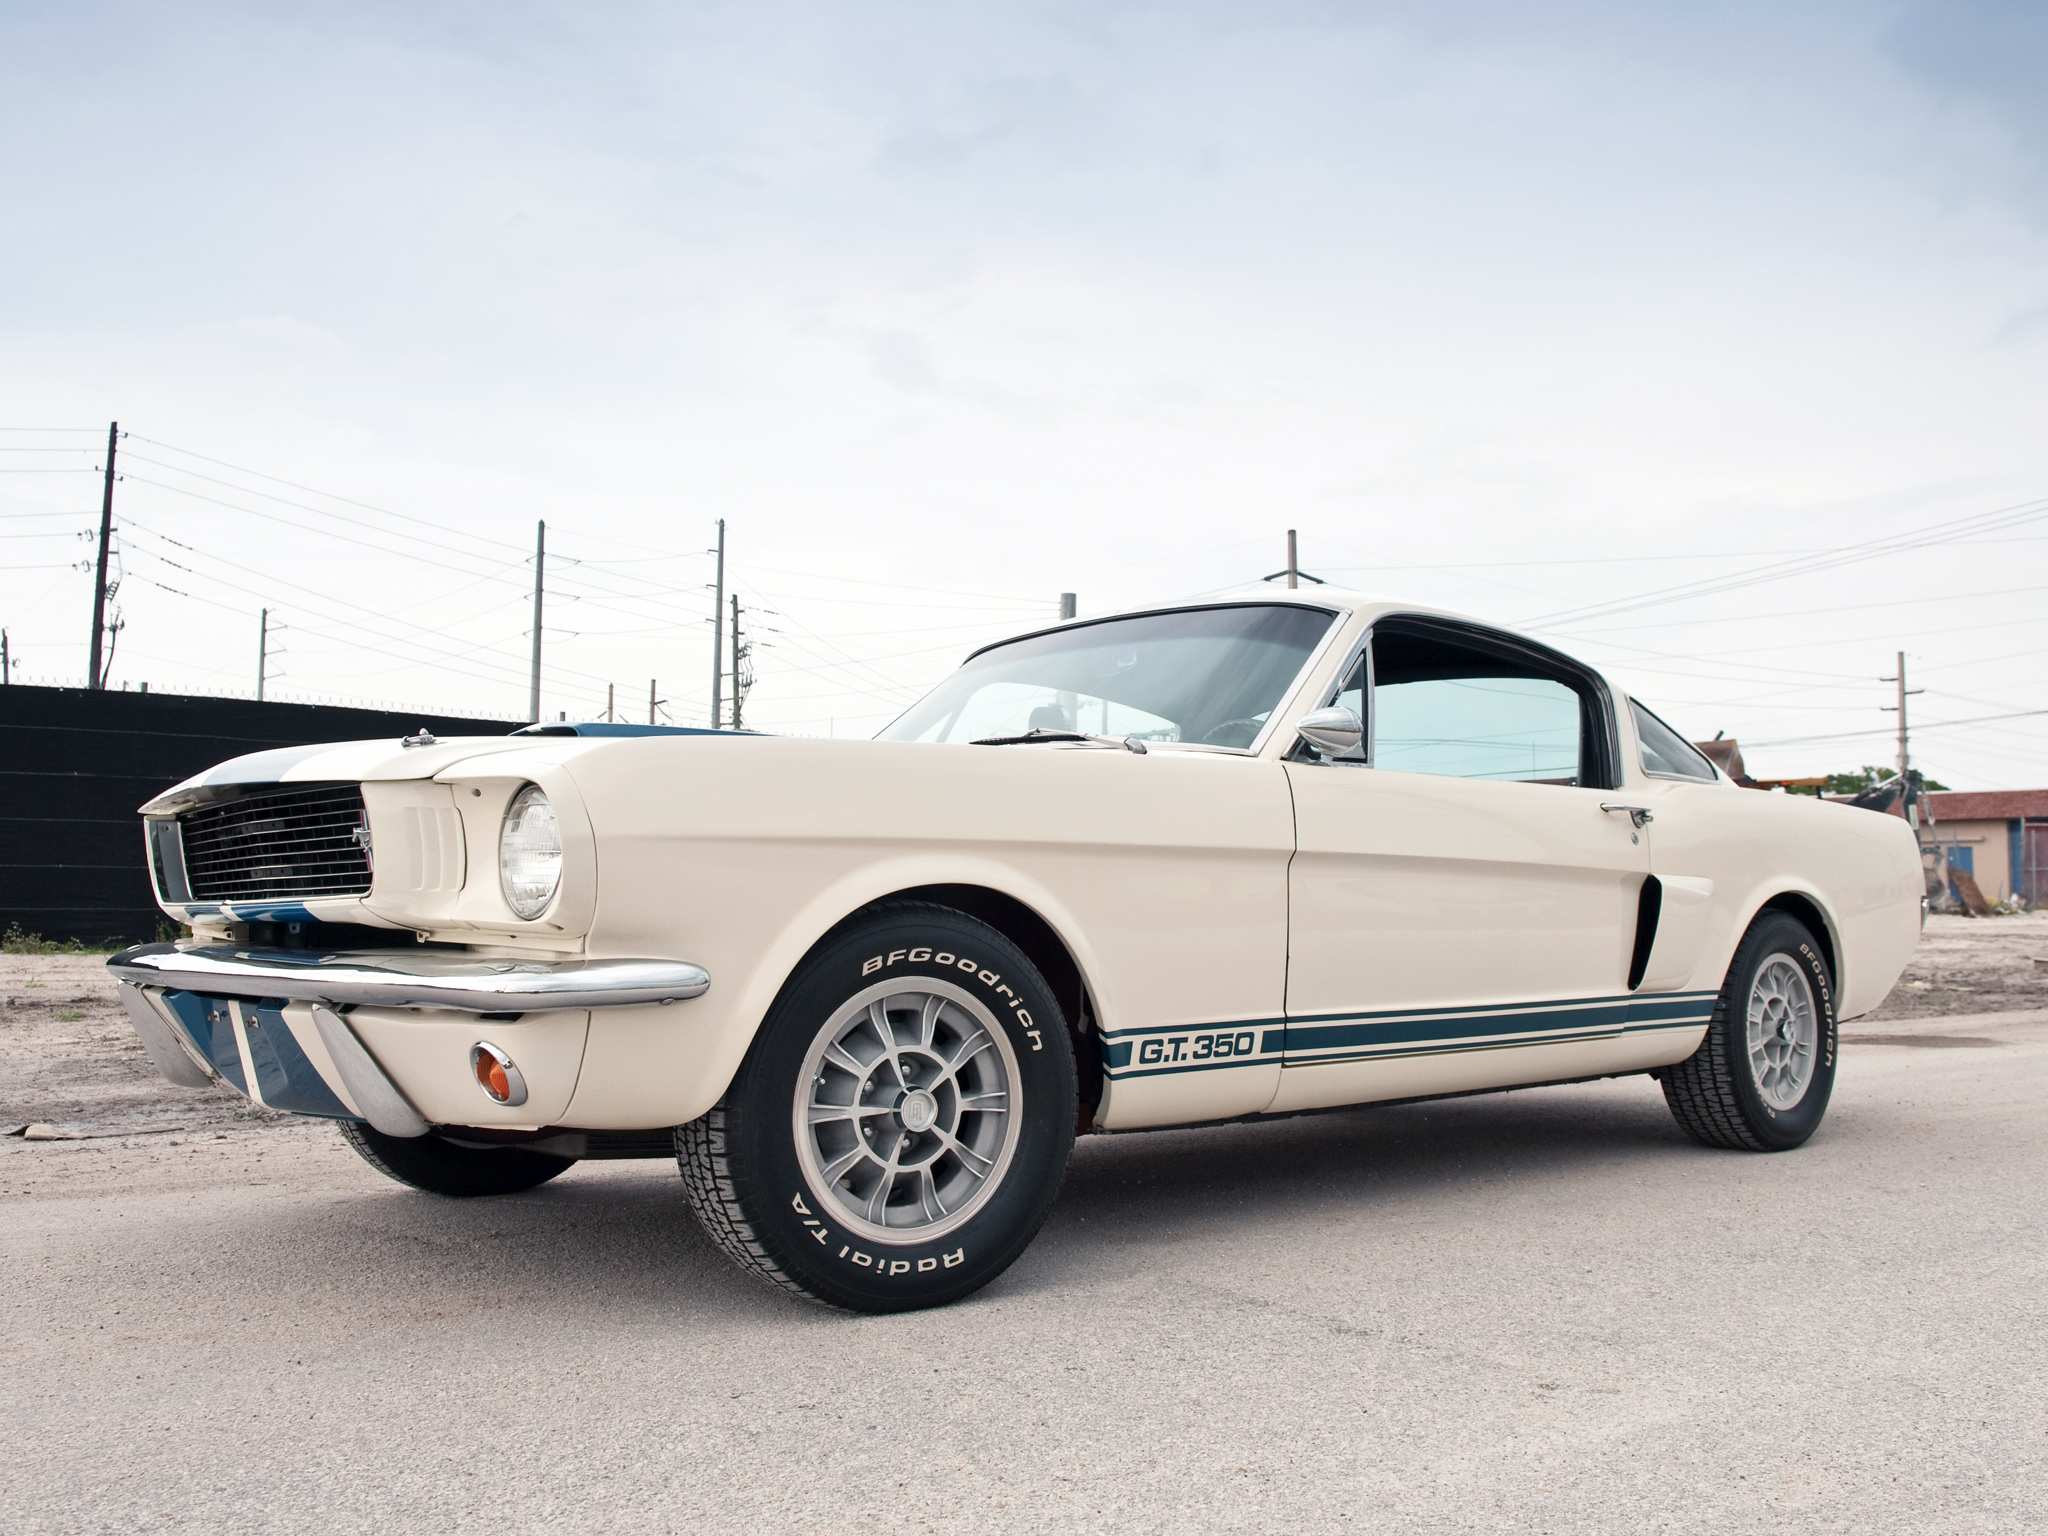 Shelby Gt350 Ford Mustang Classic W Wallpaper Background